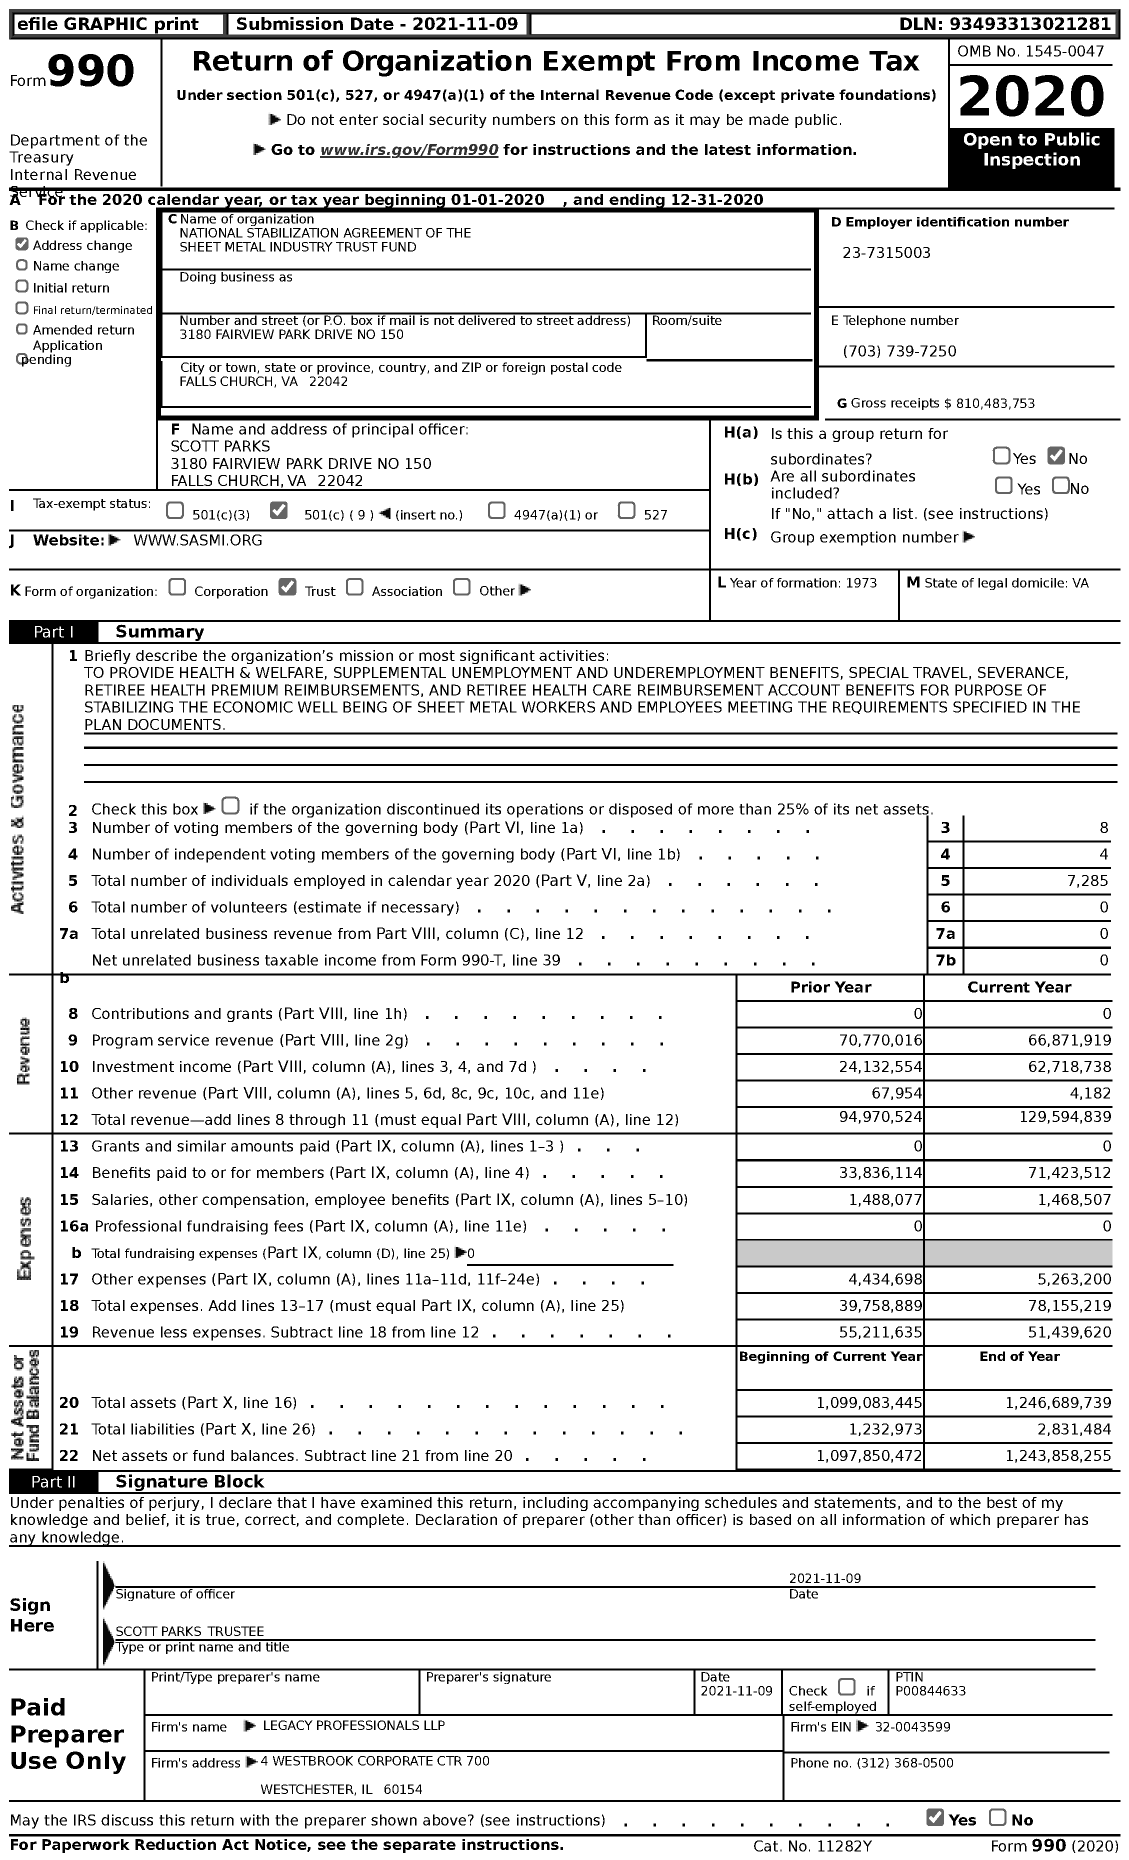 Image of first page of 2020 Form 990 for National Stabilization AGREEMENT OF The Sheet Metal Industry Trust FUND